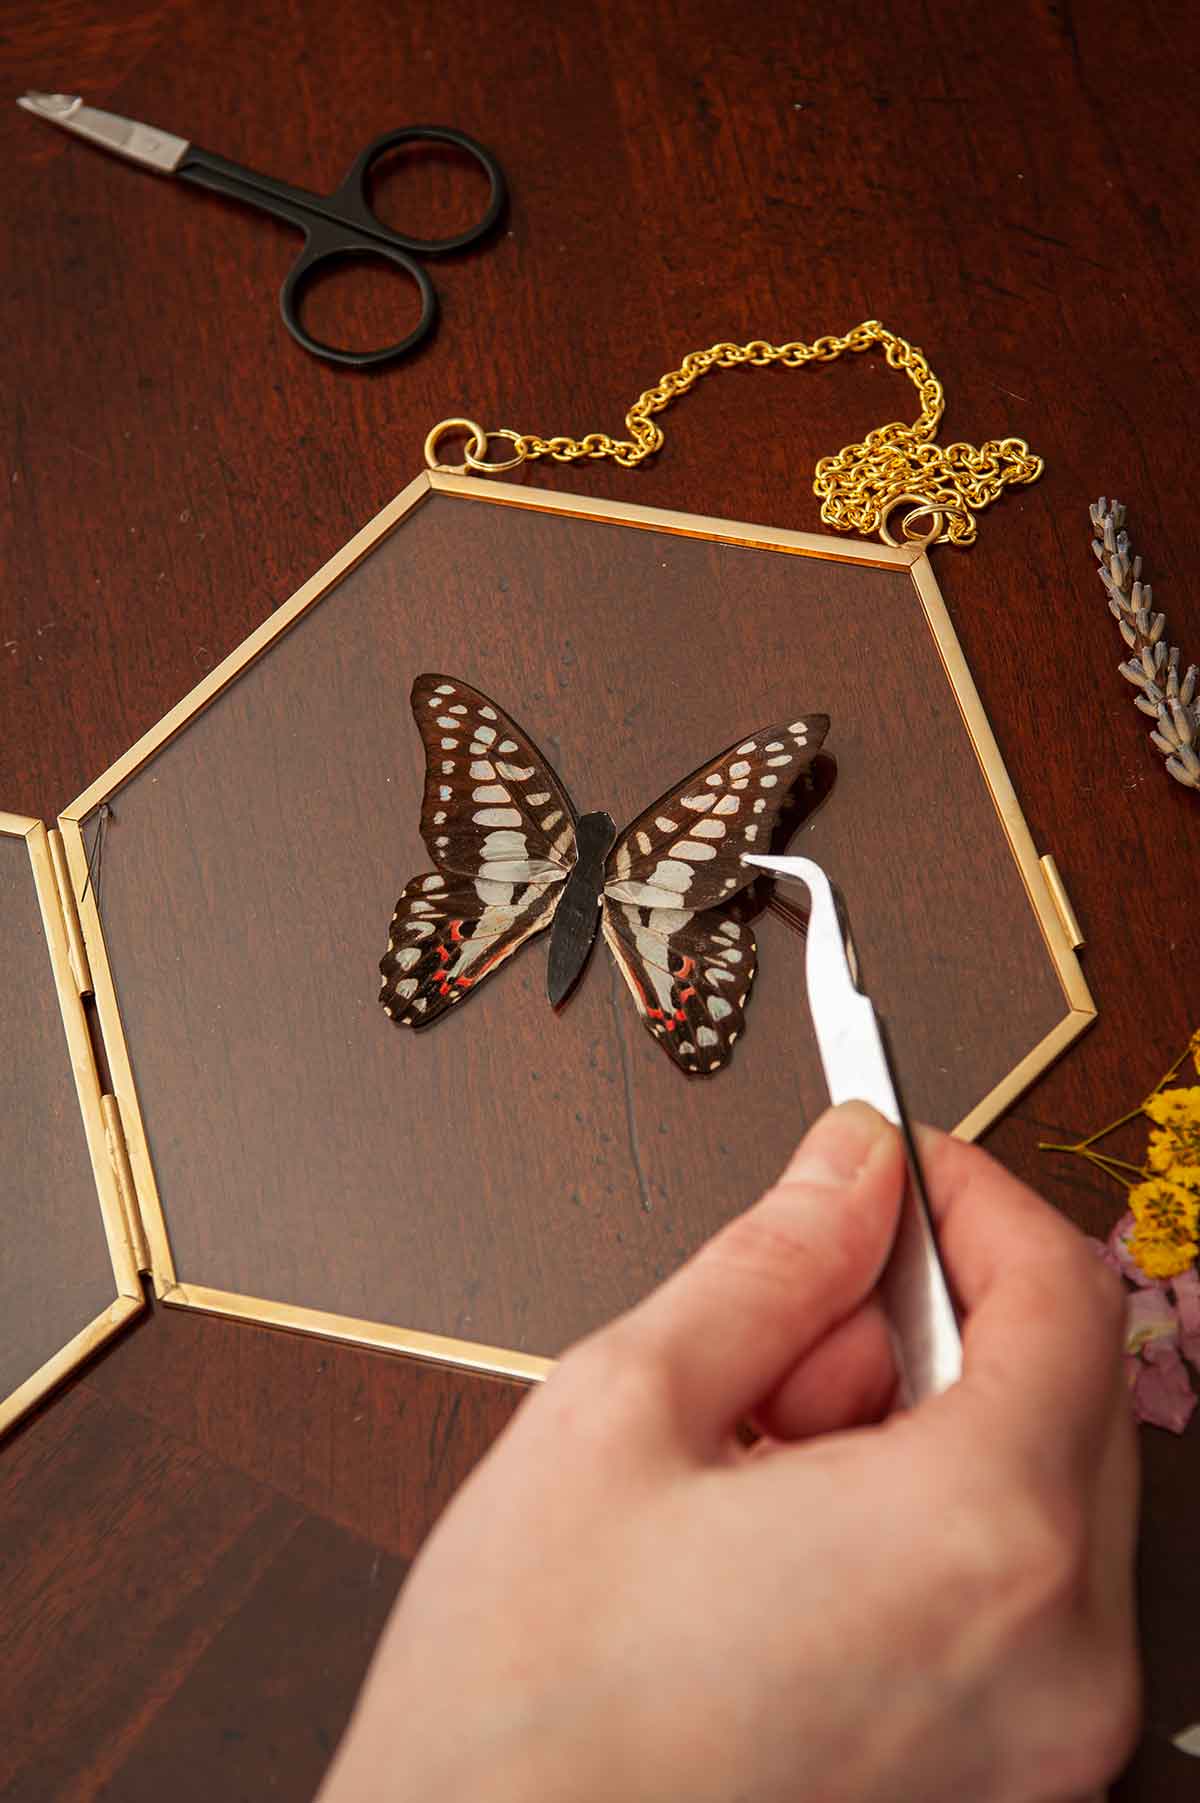 Fingers using tweezers to place butterfly wings in a clear frame on a table.